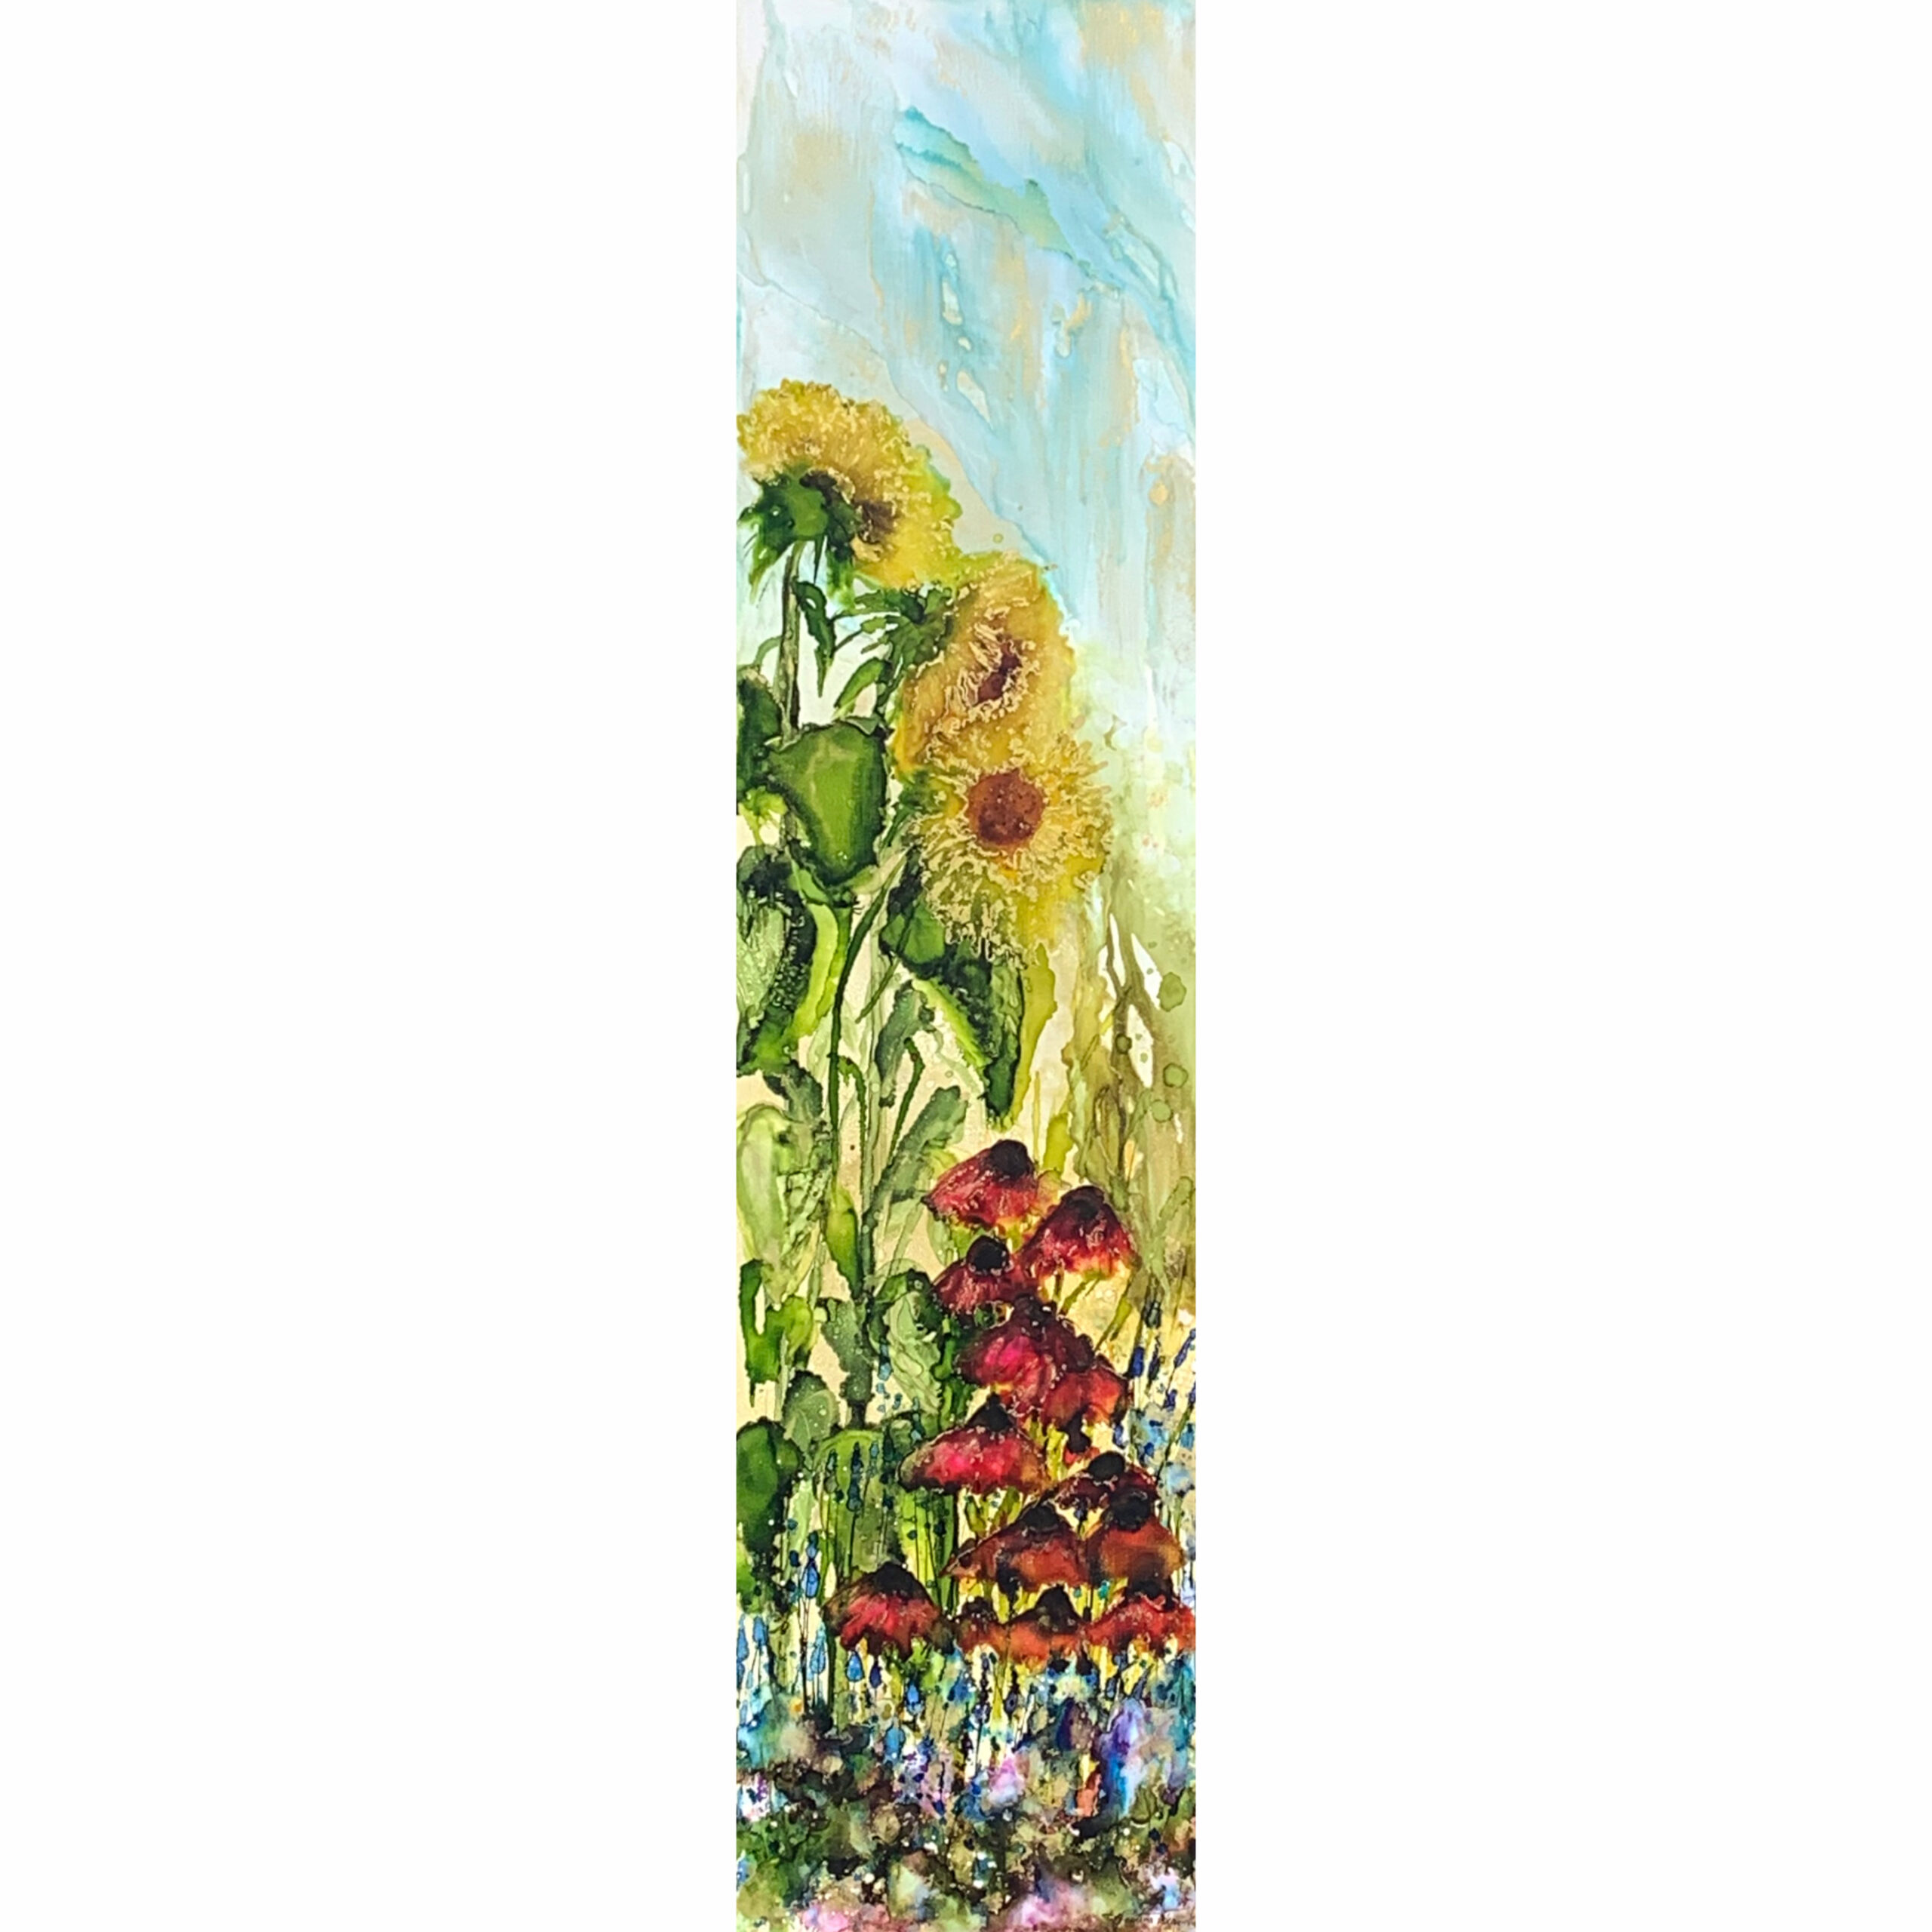 Original alcohol ink painting of sunflowers and summer flowers growing in a garden on a sunny day by Paulina Tokarski.